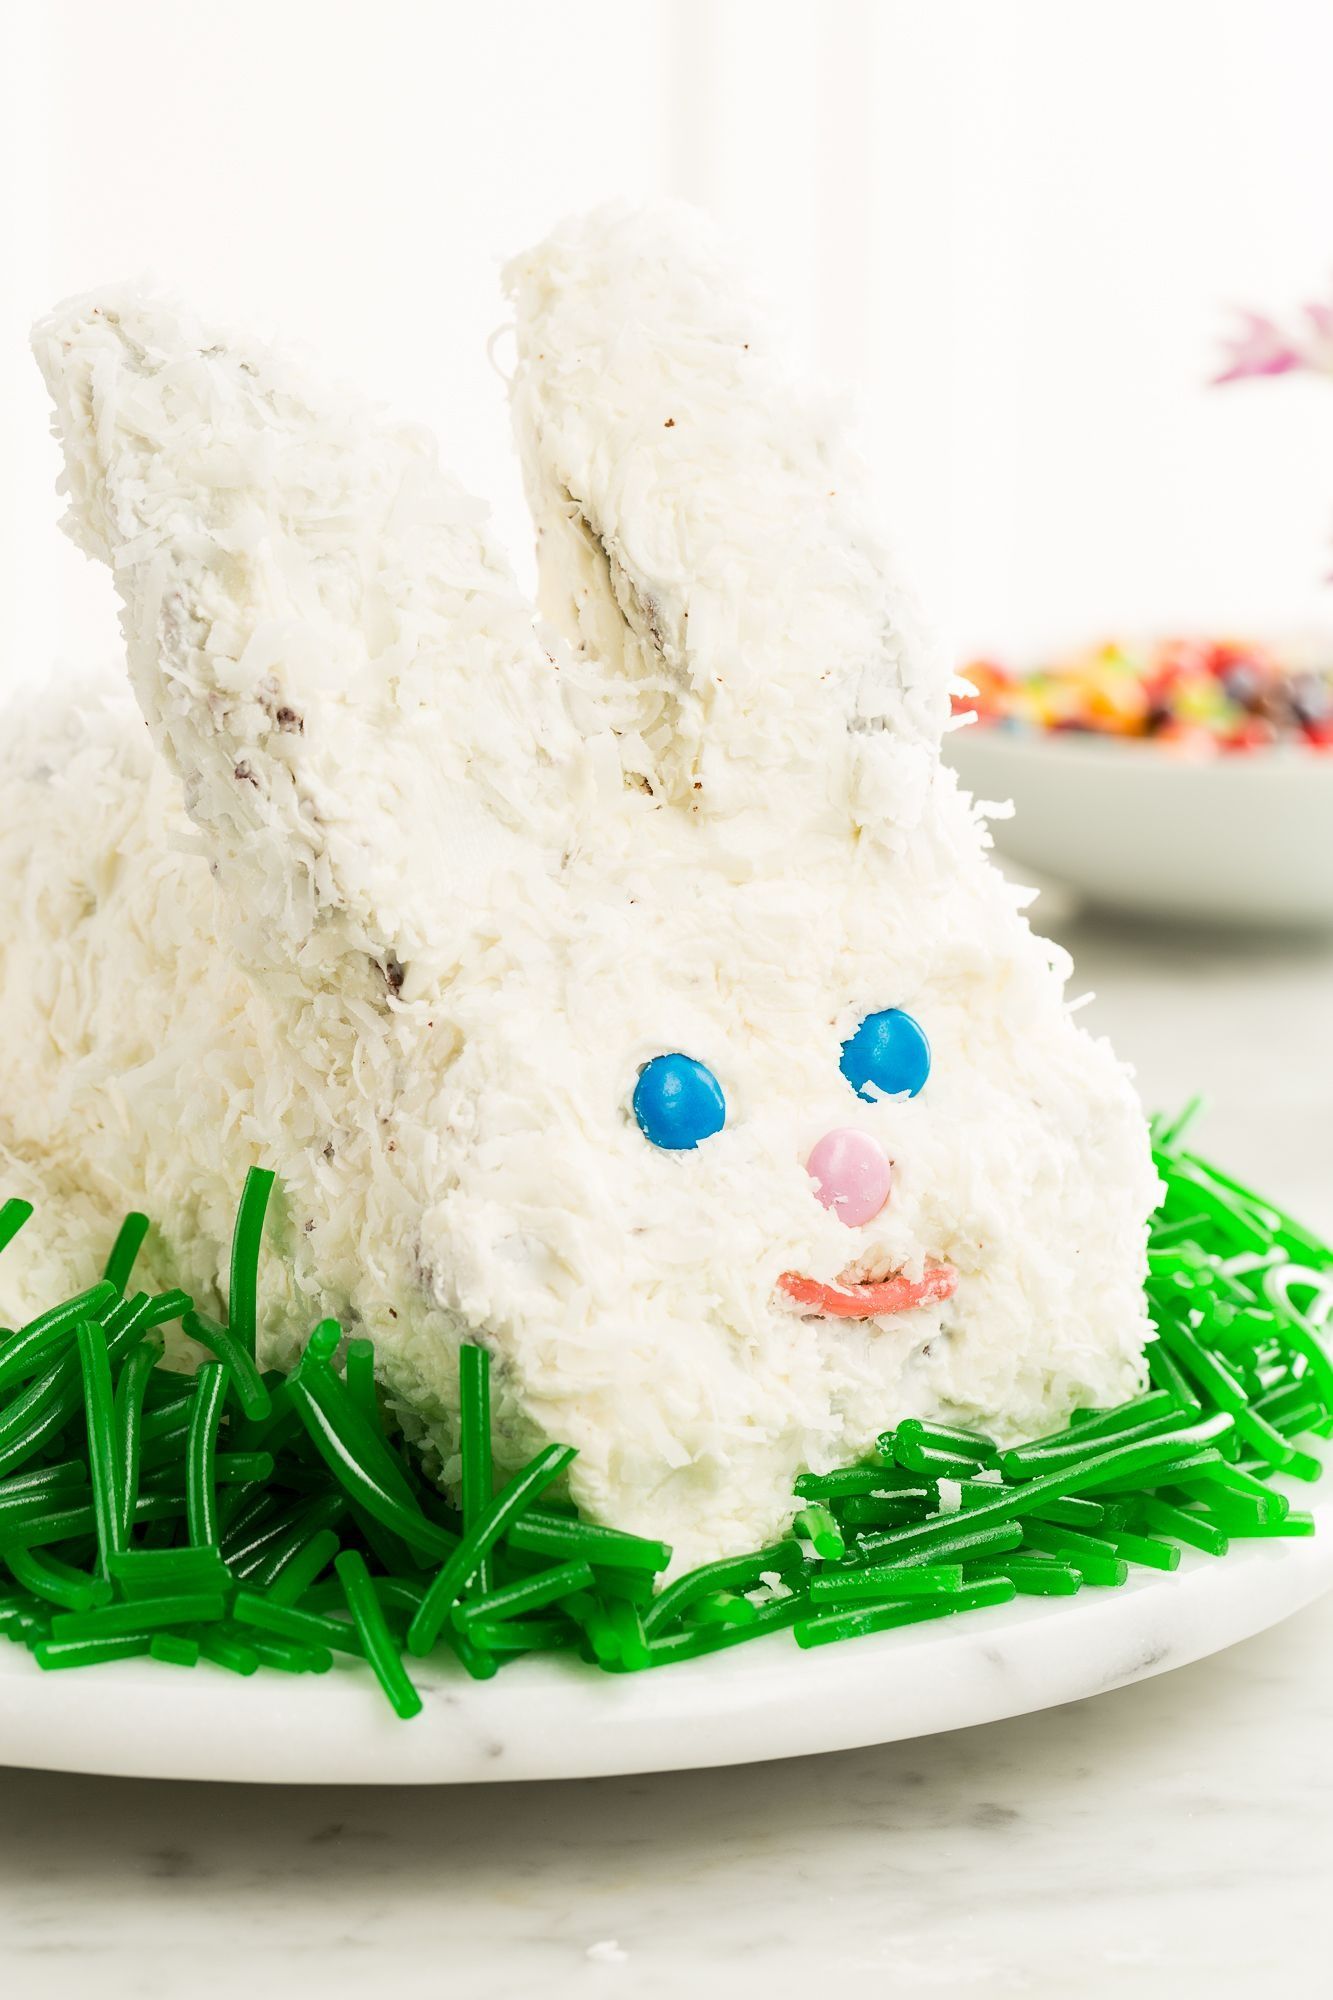 Adorable Bunny Cut Up Cake (Easy Step-By-Step Tutorial)